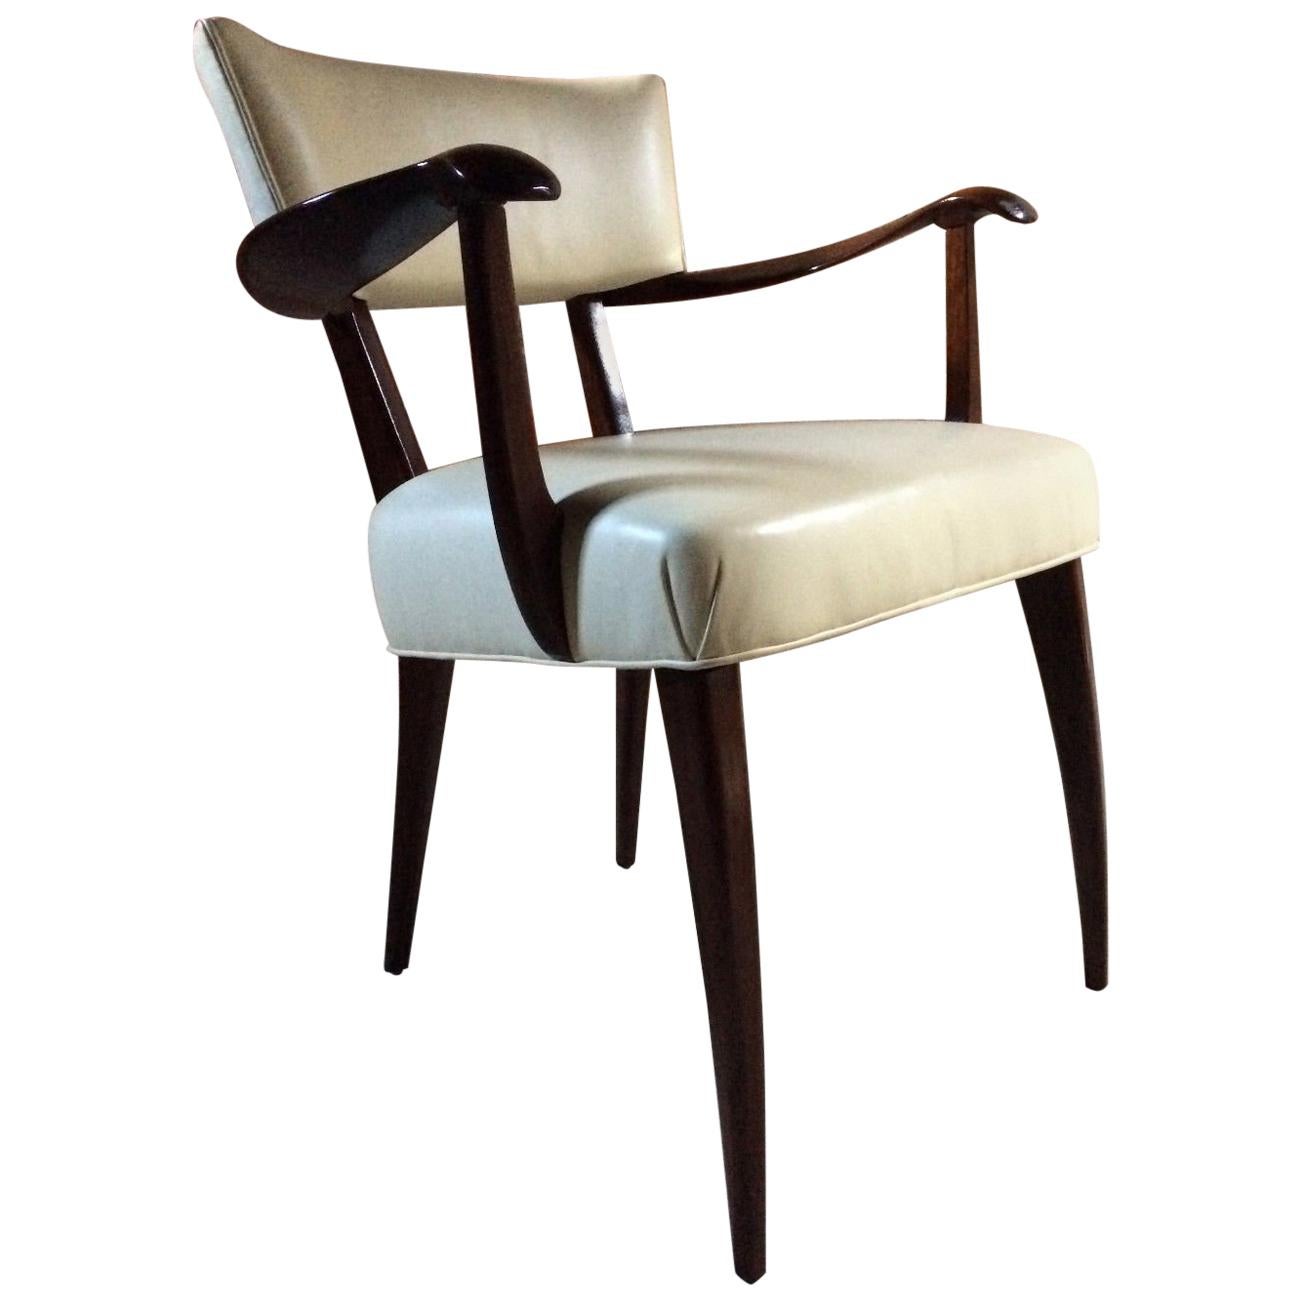 Paolo Buffa attributed cream leather upholstered and stained mahogany dining chairs with sabre legs, 20th century Italian design at its very best, recently restored and renovated including two carvers, this set dating to 1940s and offered in